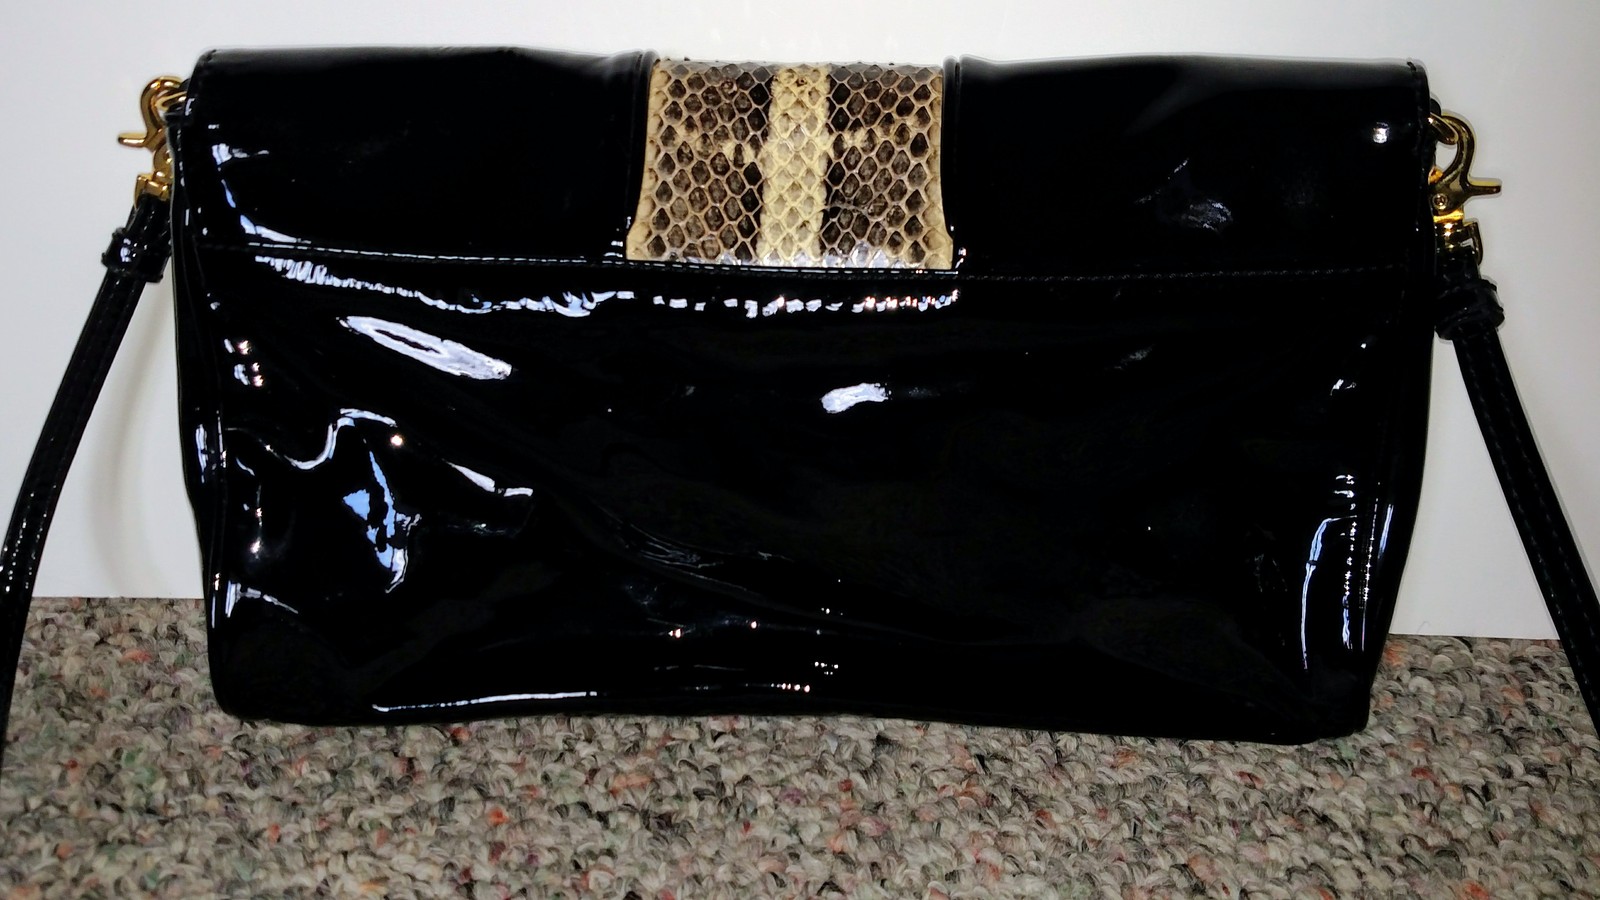 ** REDUCED ** Black Patent Leather & Snakeskin purse, clutch, over ...